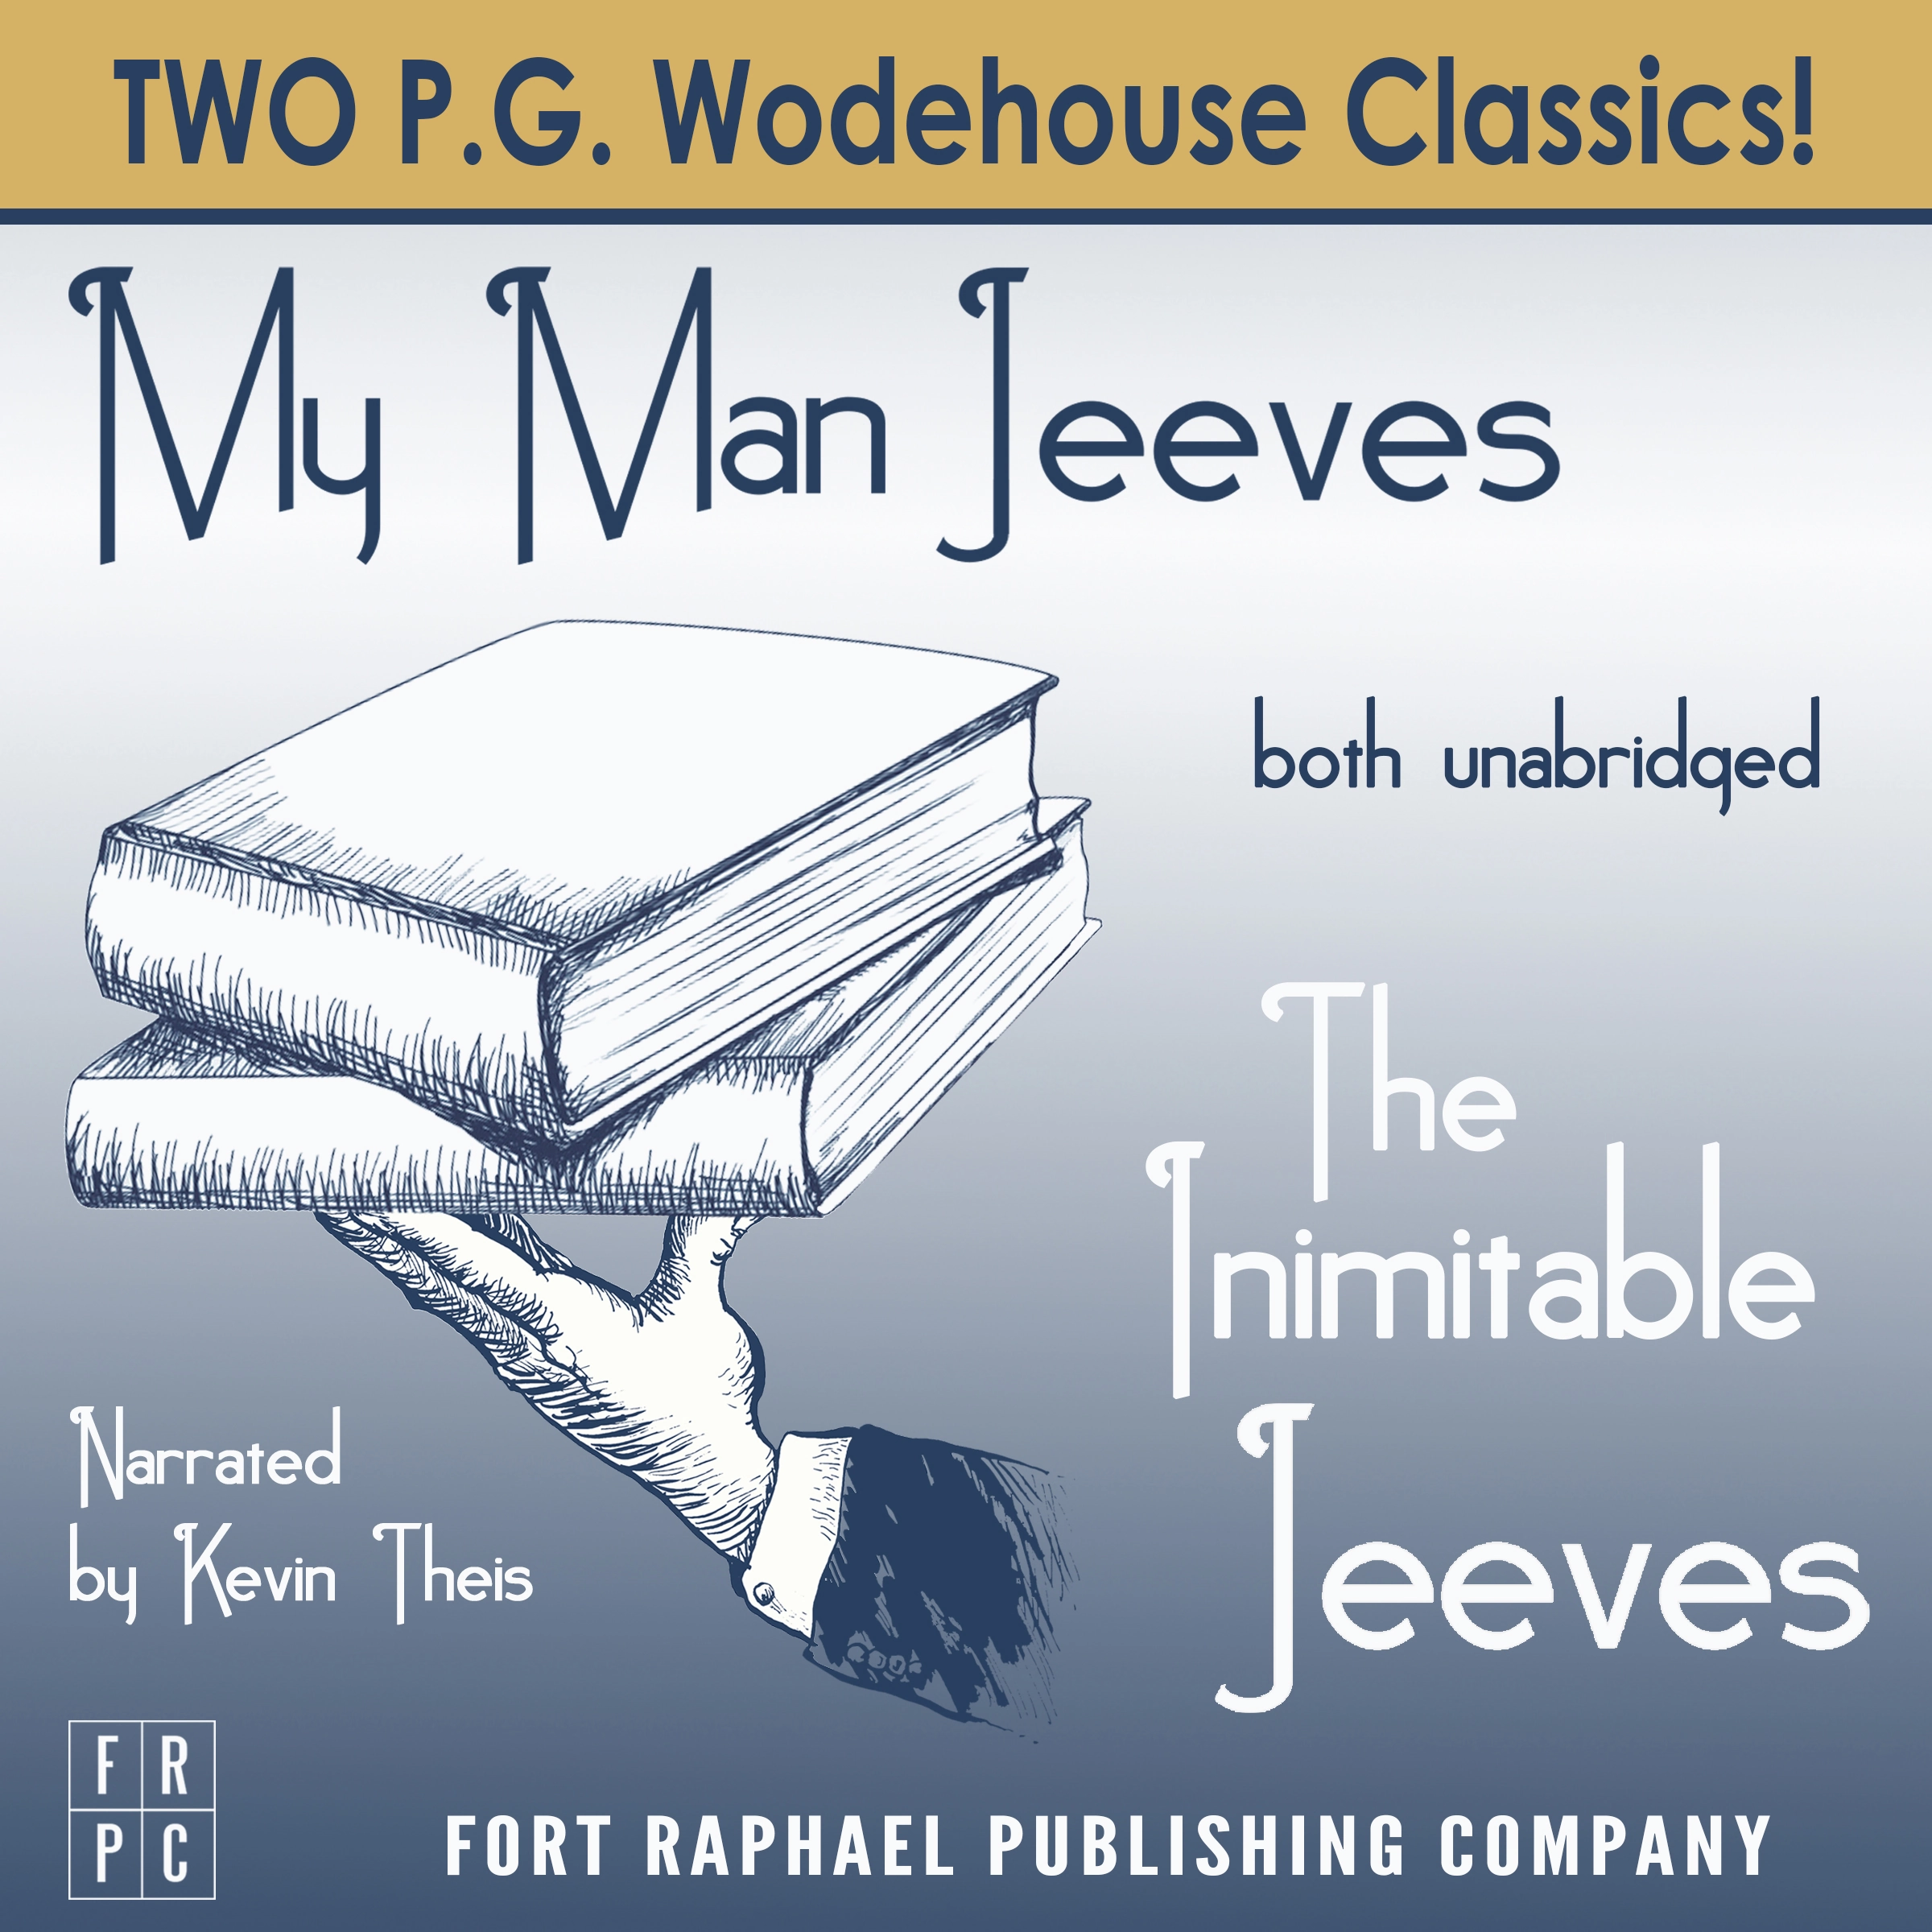 The Inimitable Jeeves and My Man Jeeves - Unabridged by P.G. Wodehouse Audiobook